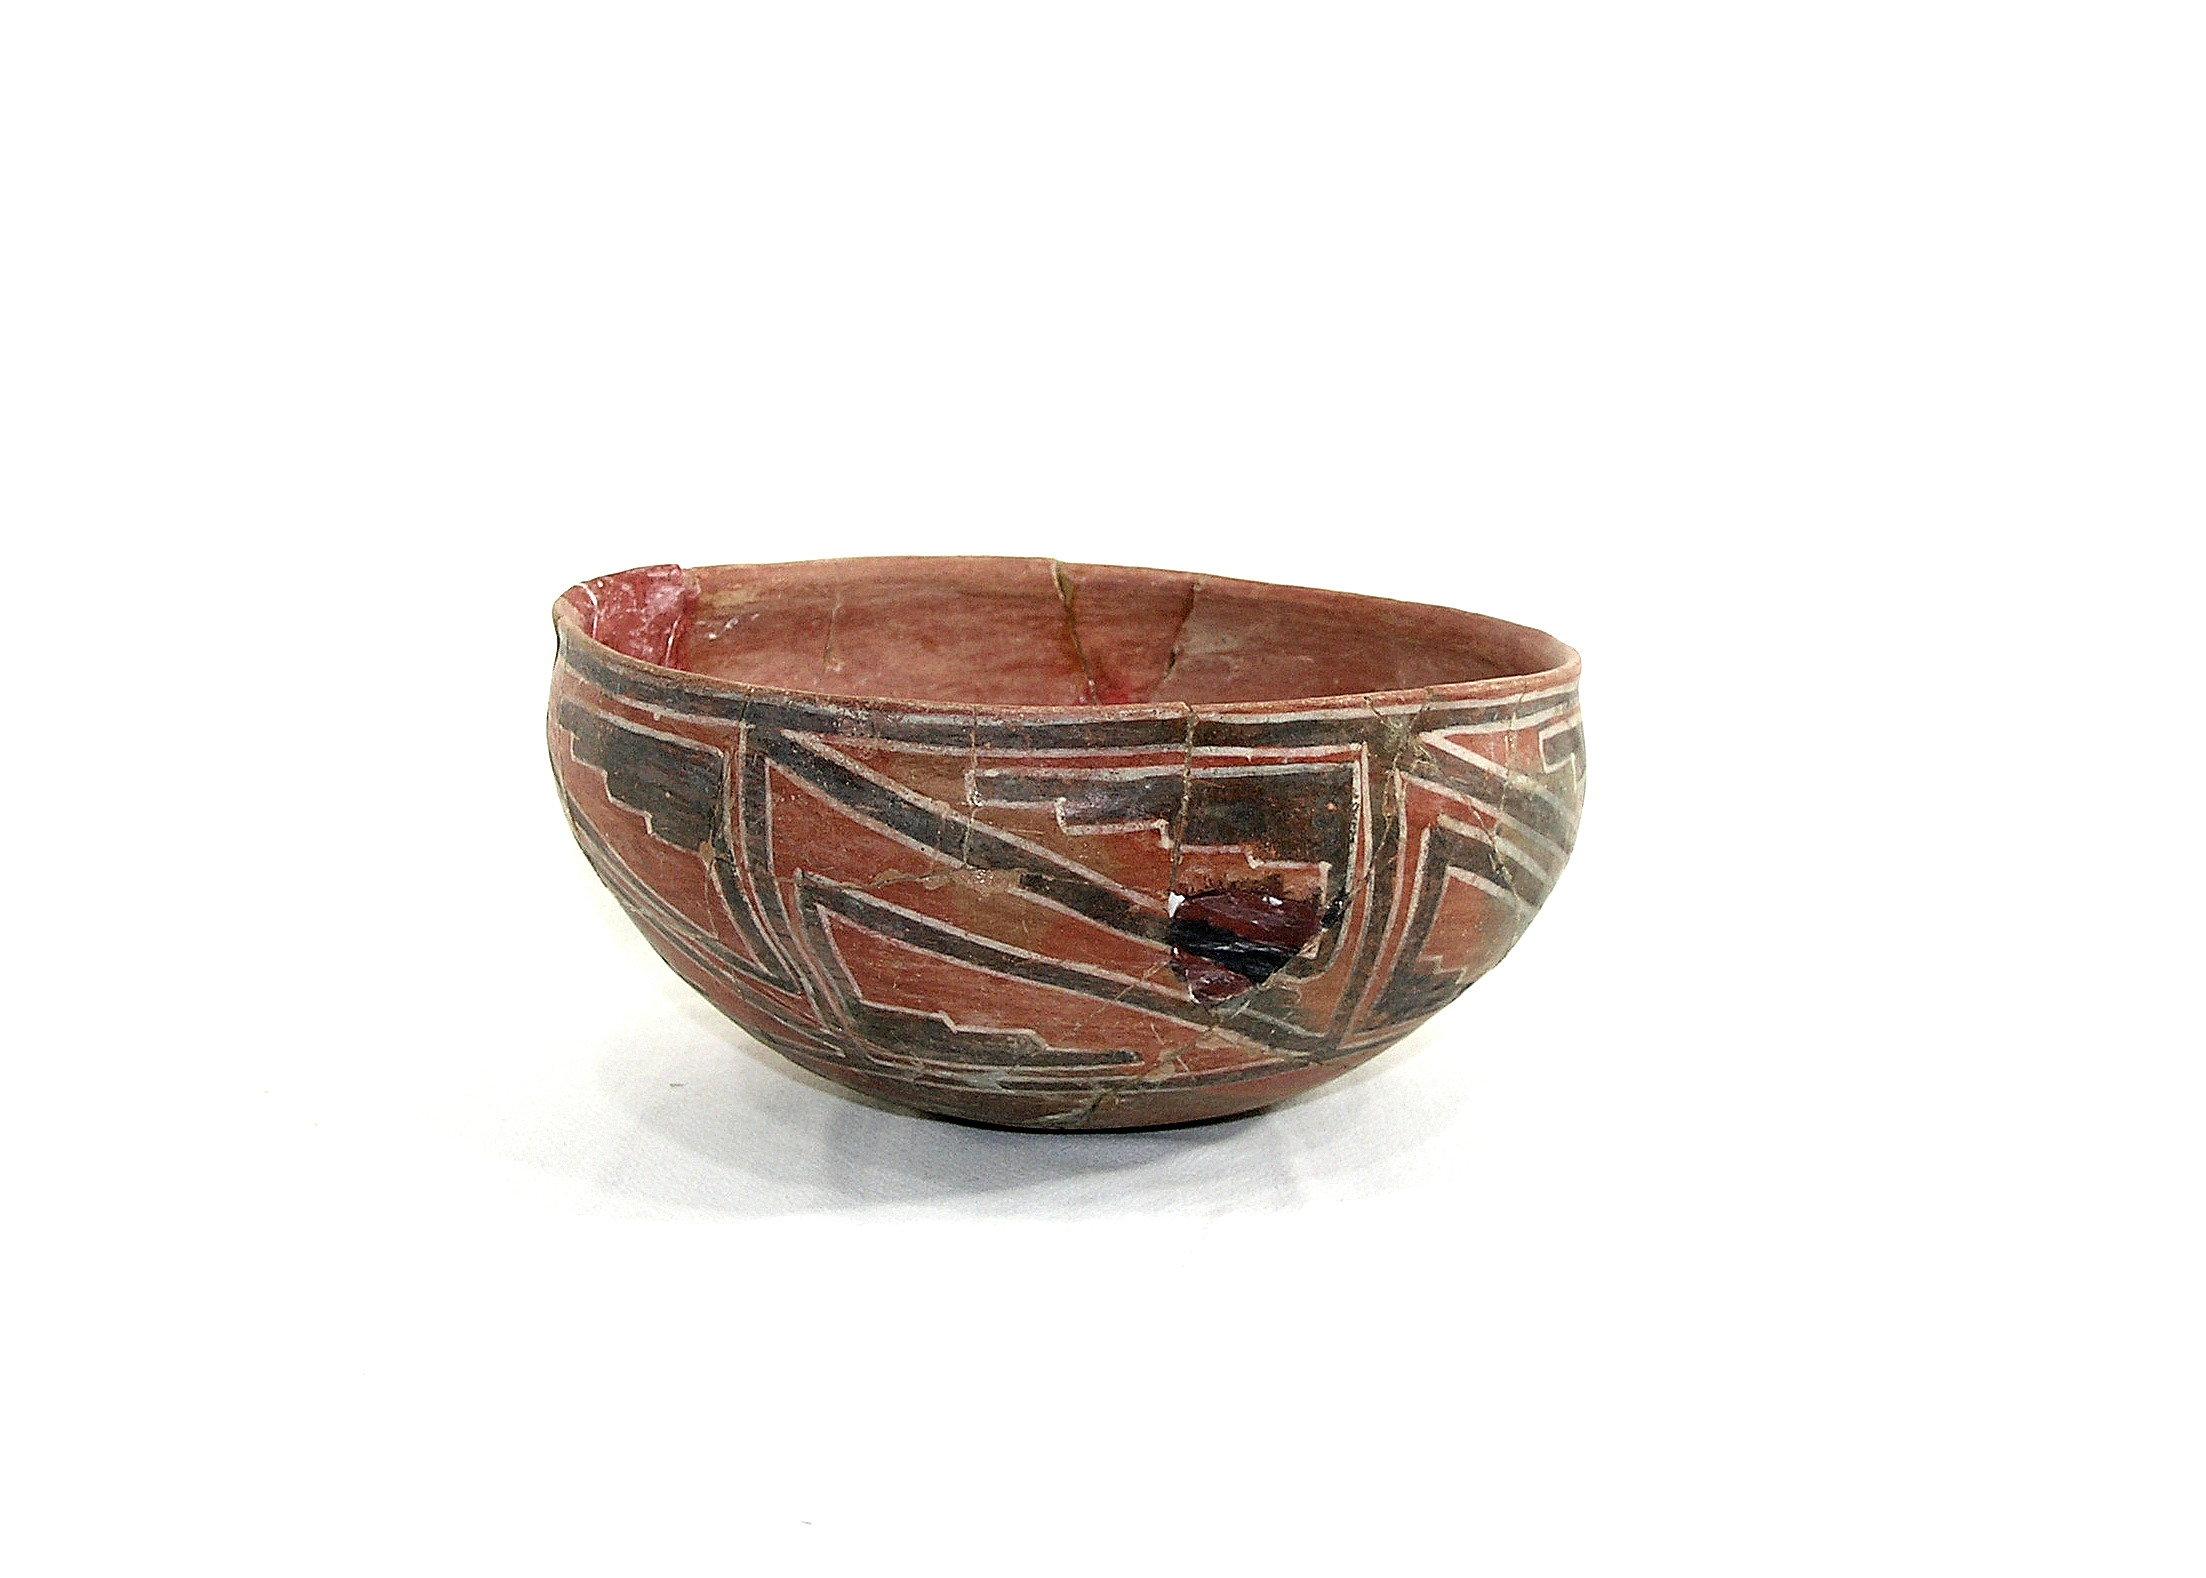 Native American excavated Pottery Bowl. Origin Unknown. Nicely put back tog